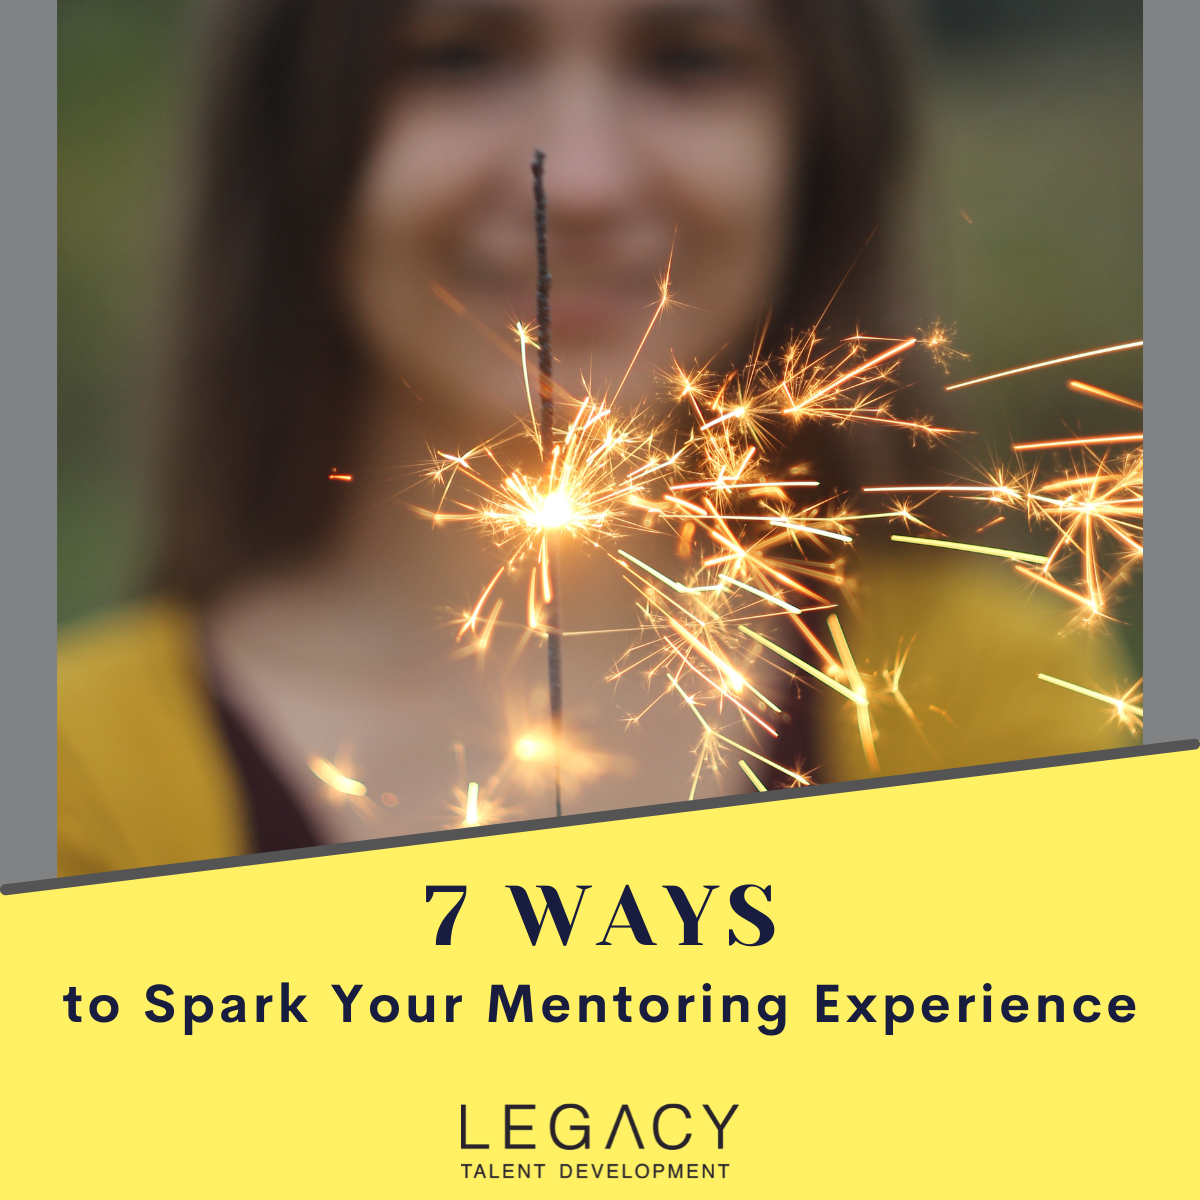 🪄7 Activities to Spark Your Mentoring Experience